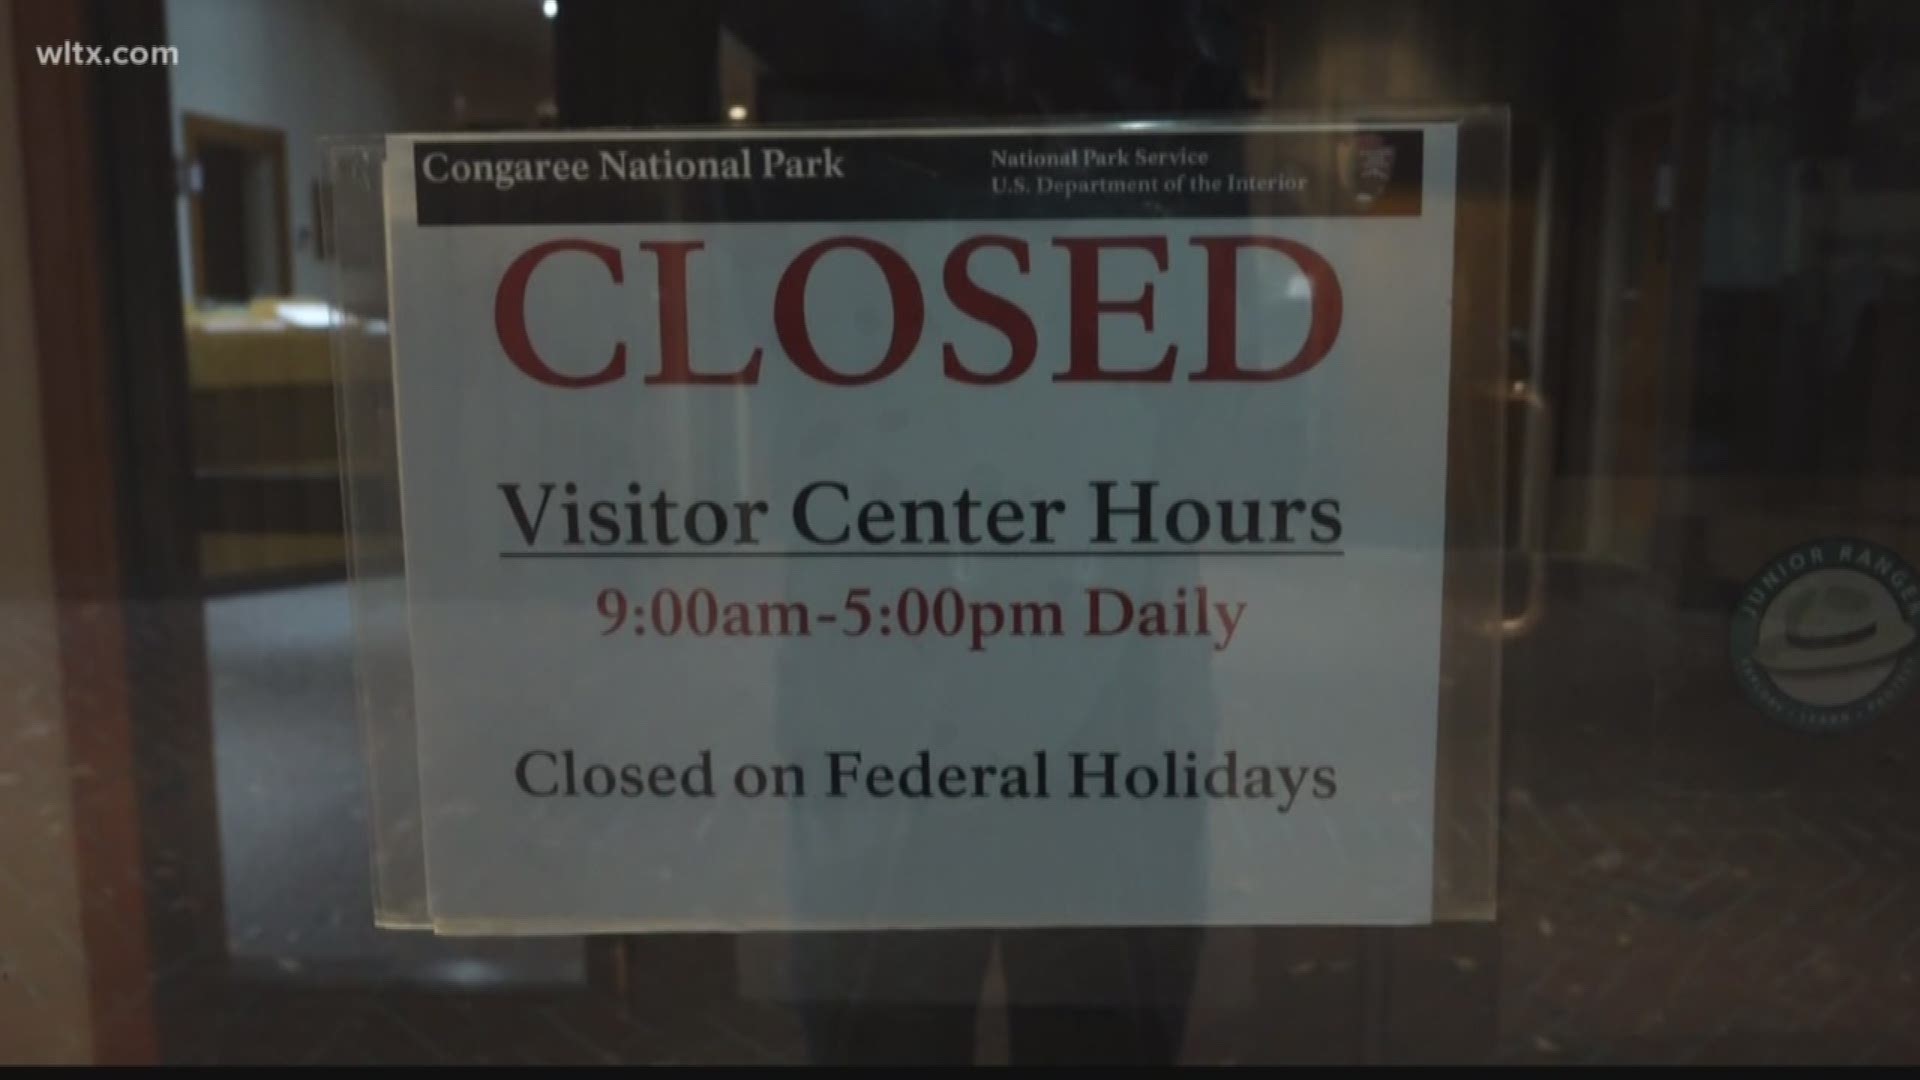 Here in South Carolina the effects of the government shutdown are being felt